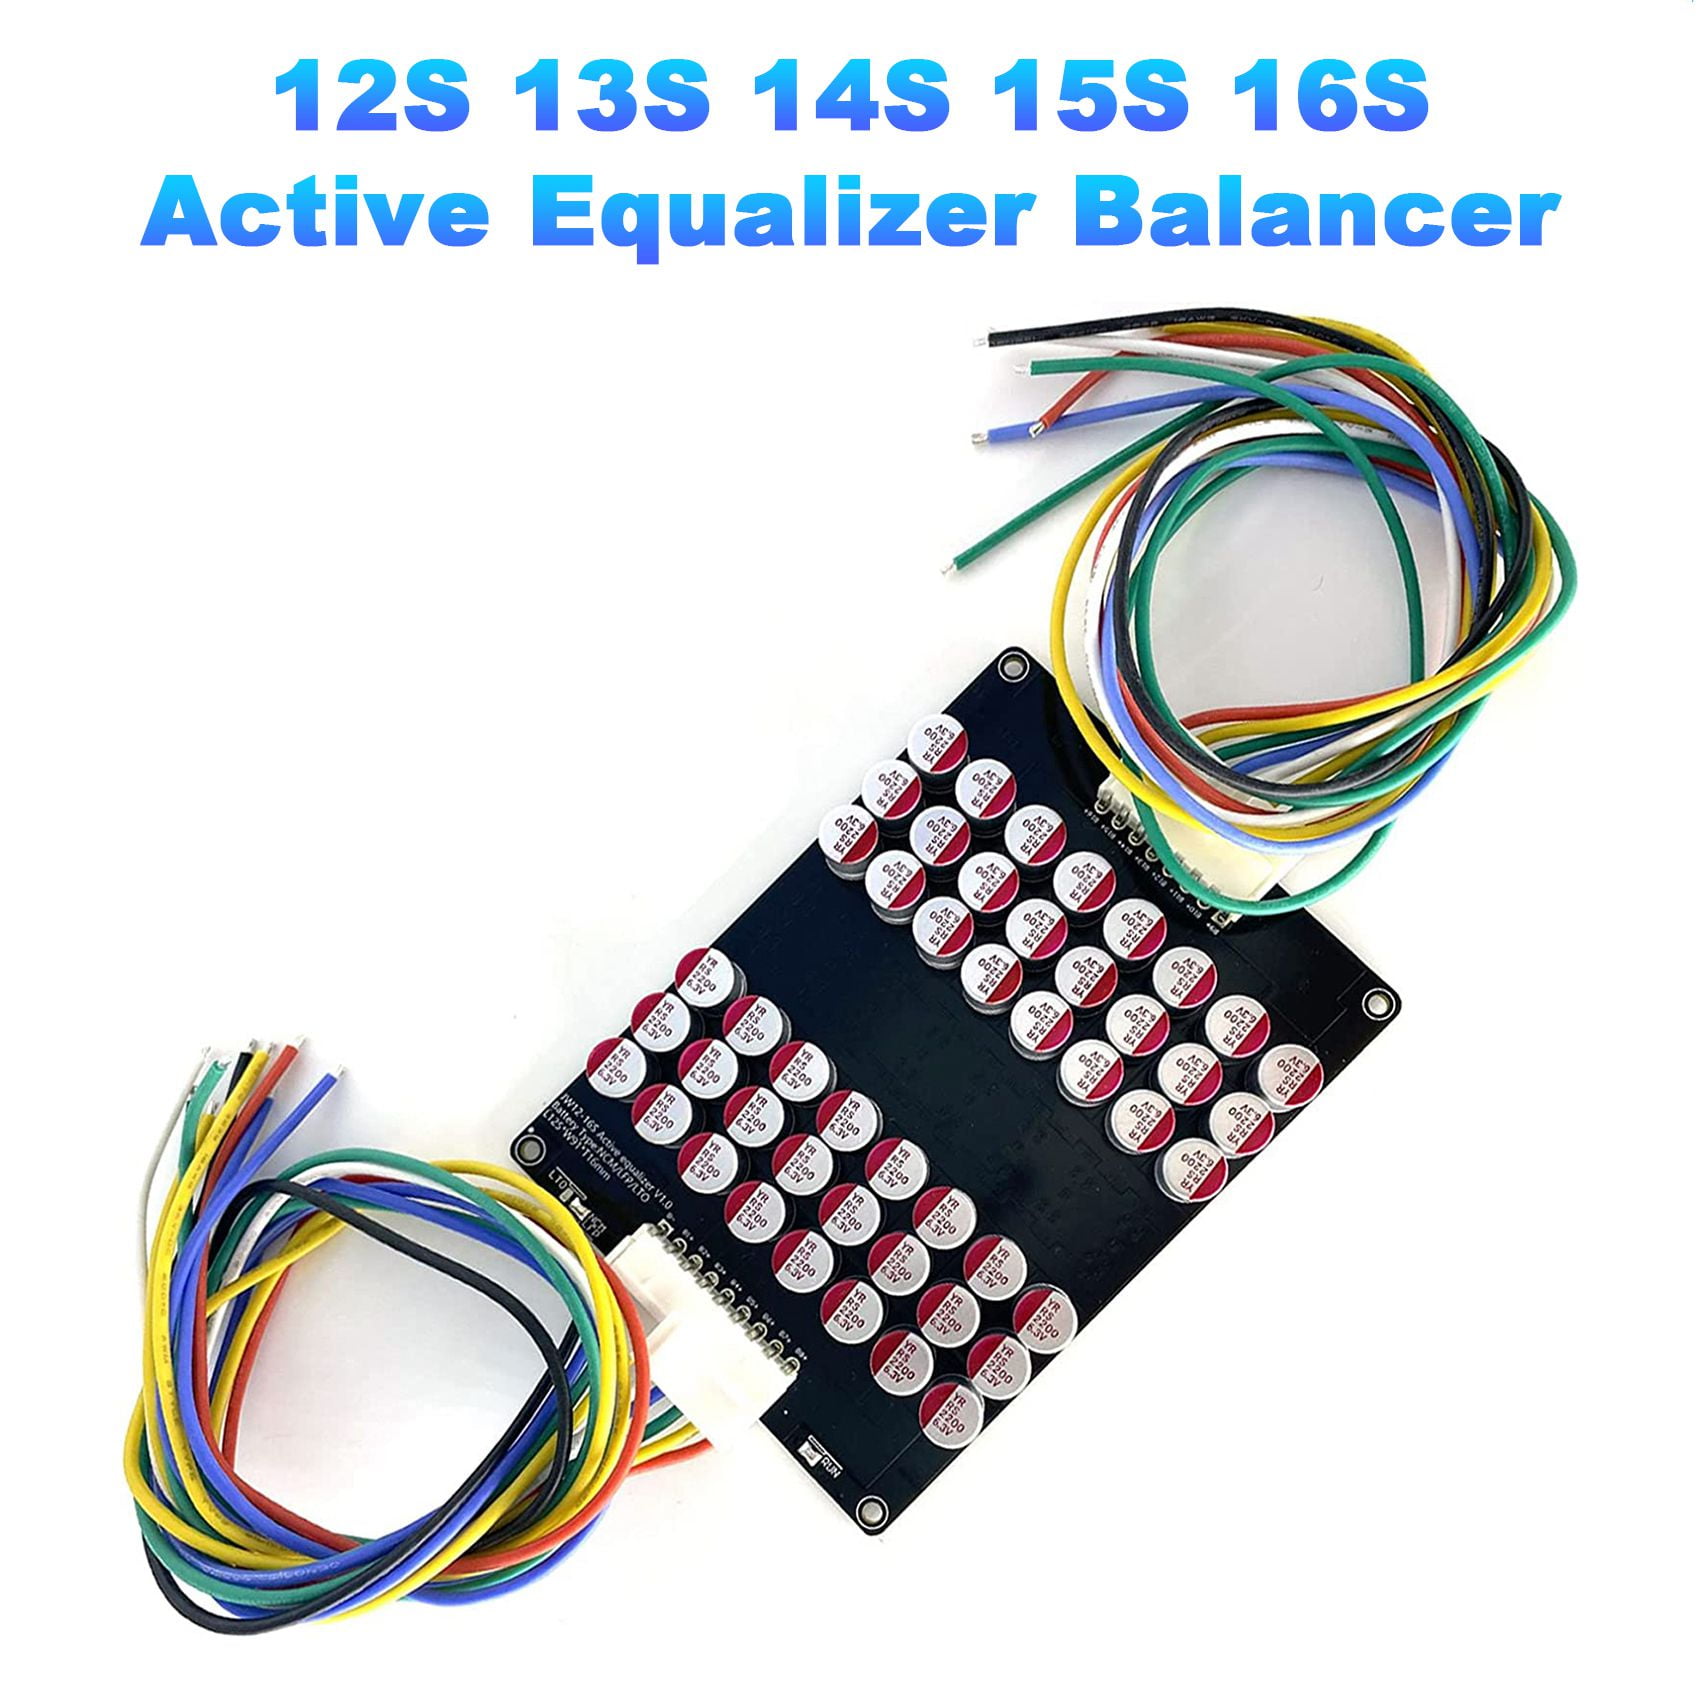 12S 13S 14S 15S 16S Active Equalizer Balancer Lifepo4 Lipo LTO Battery  Energy Equalization Capacitor BMS Board 